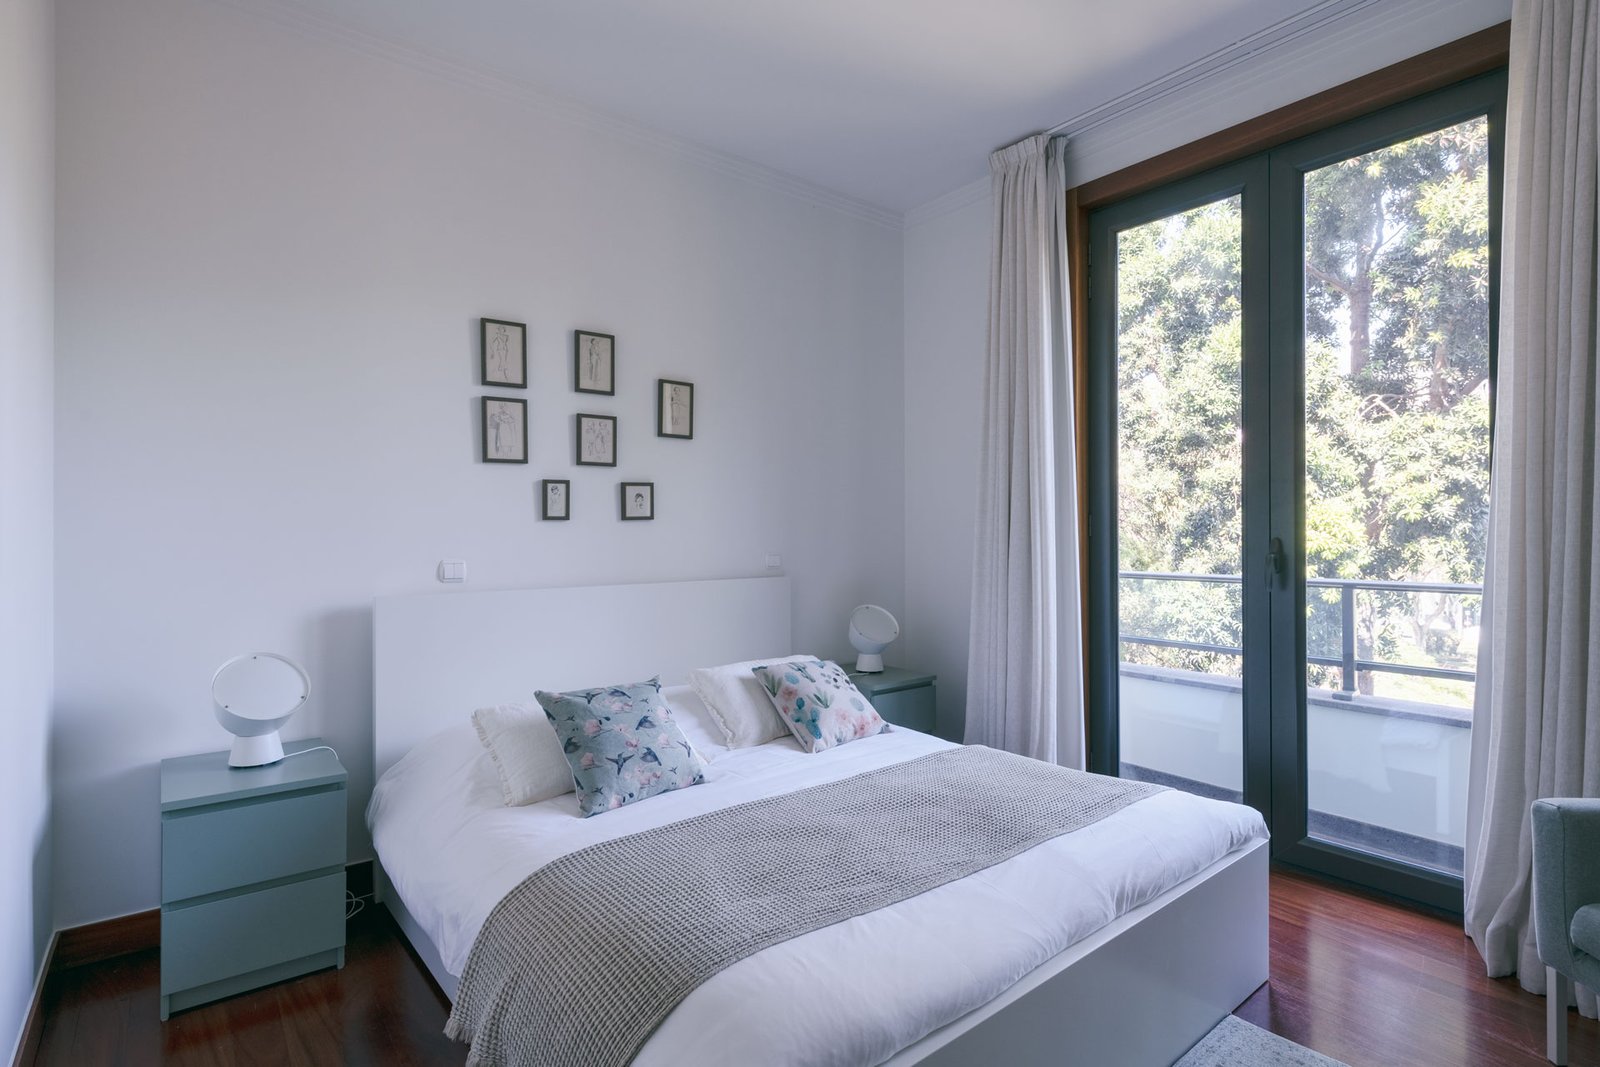 rental apartment in Madeira